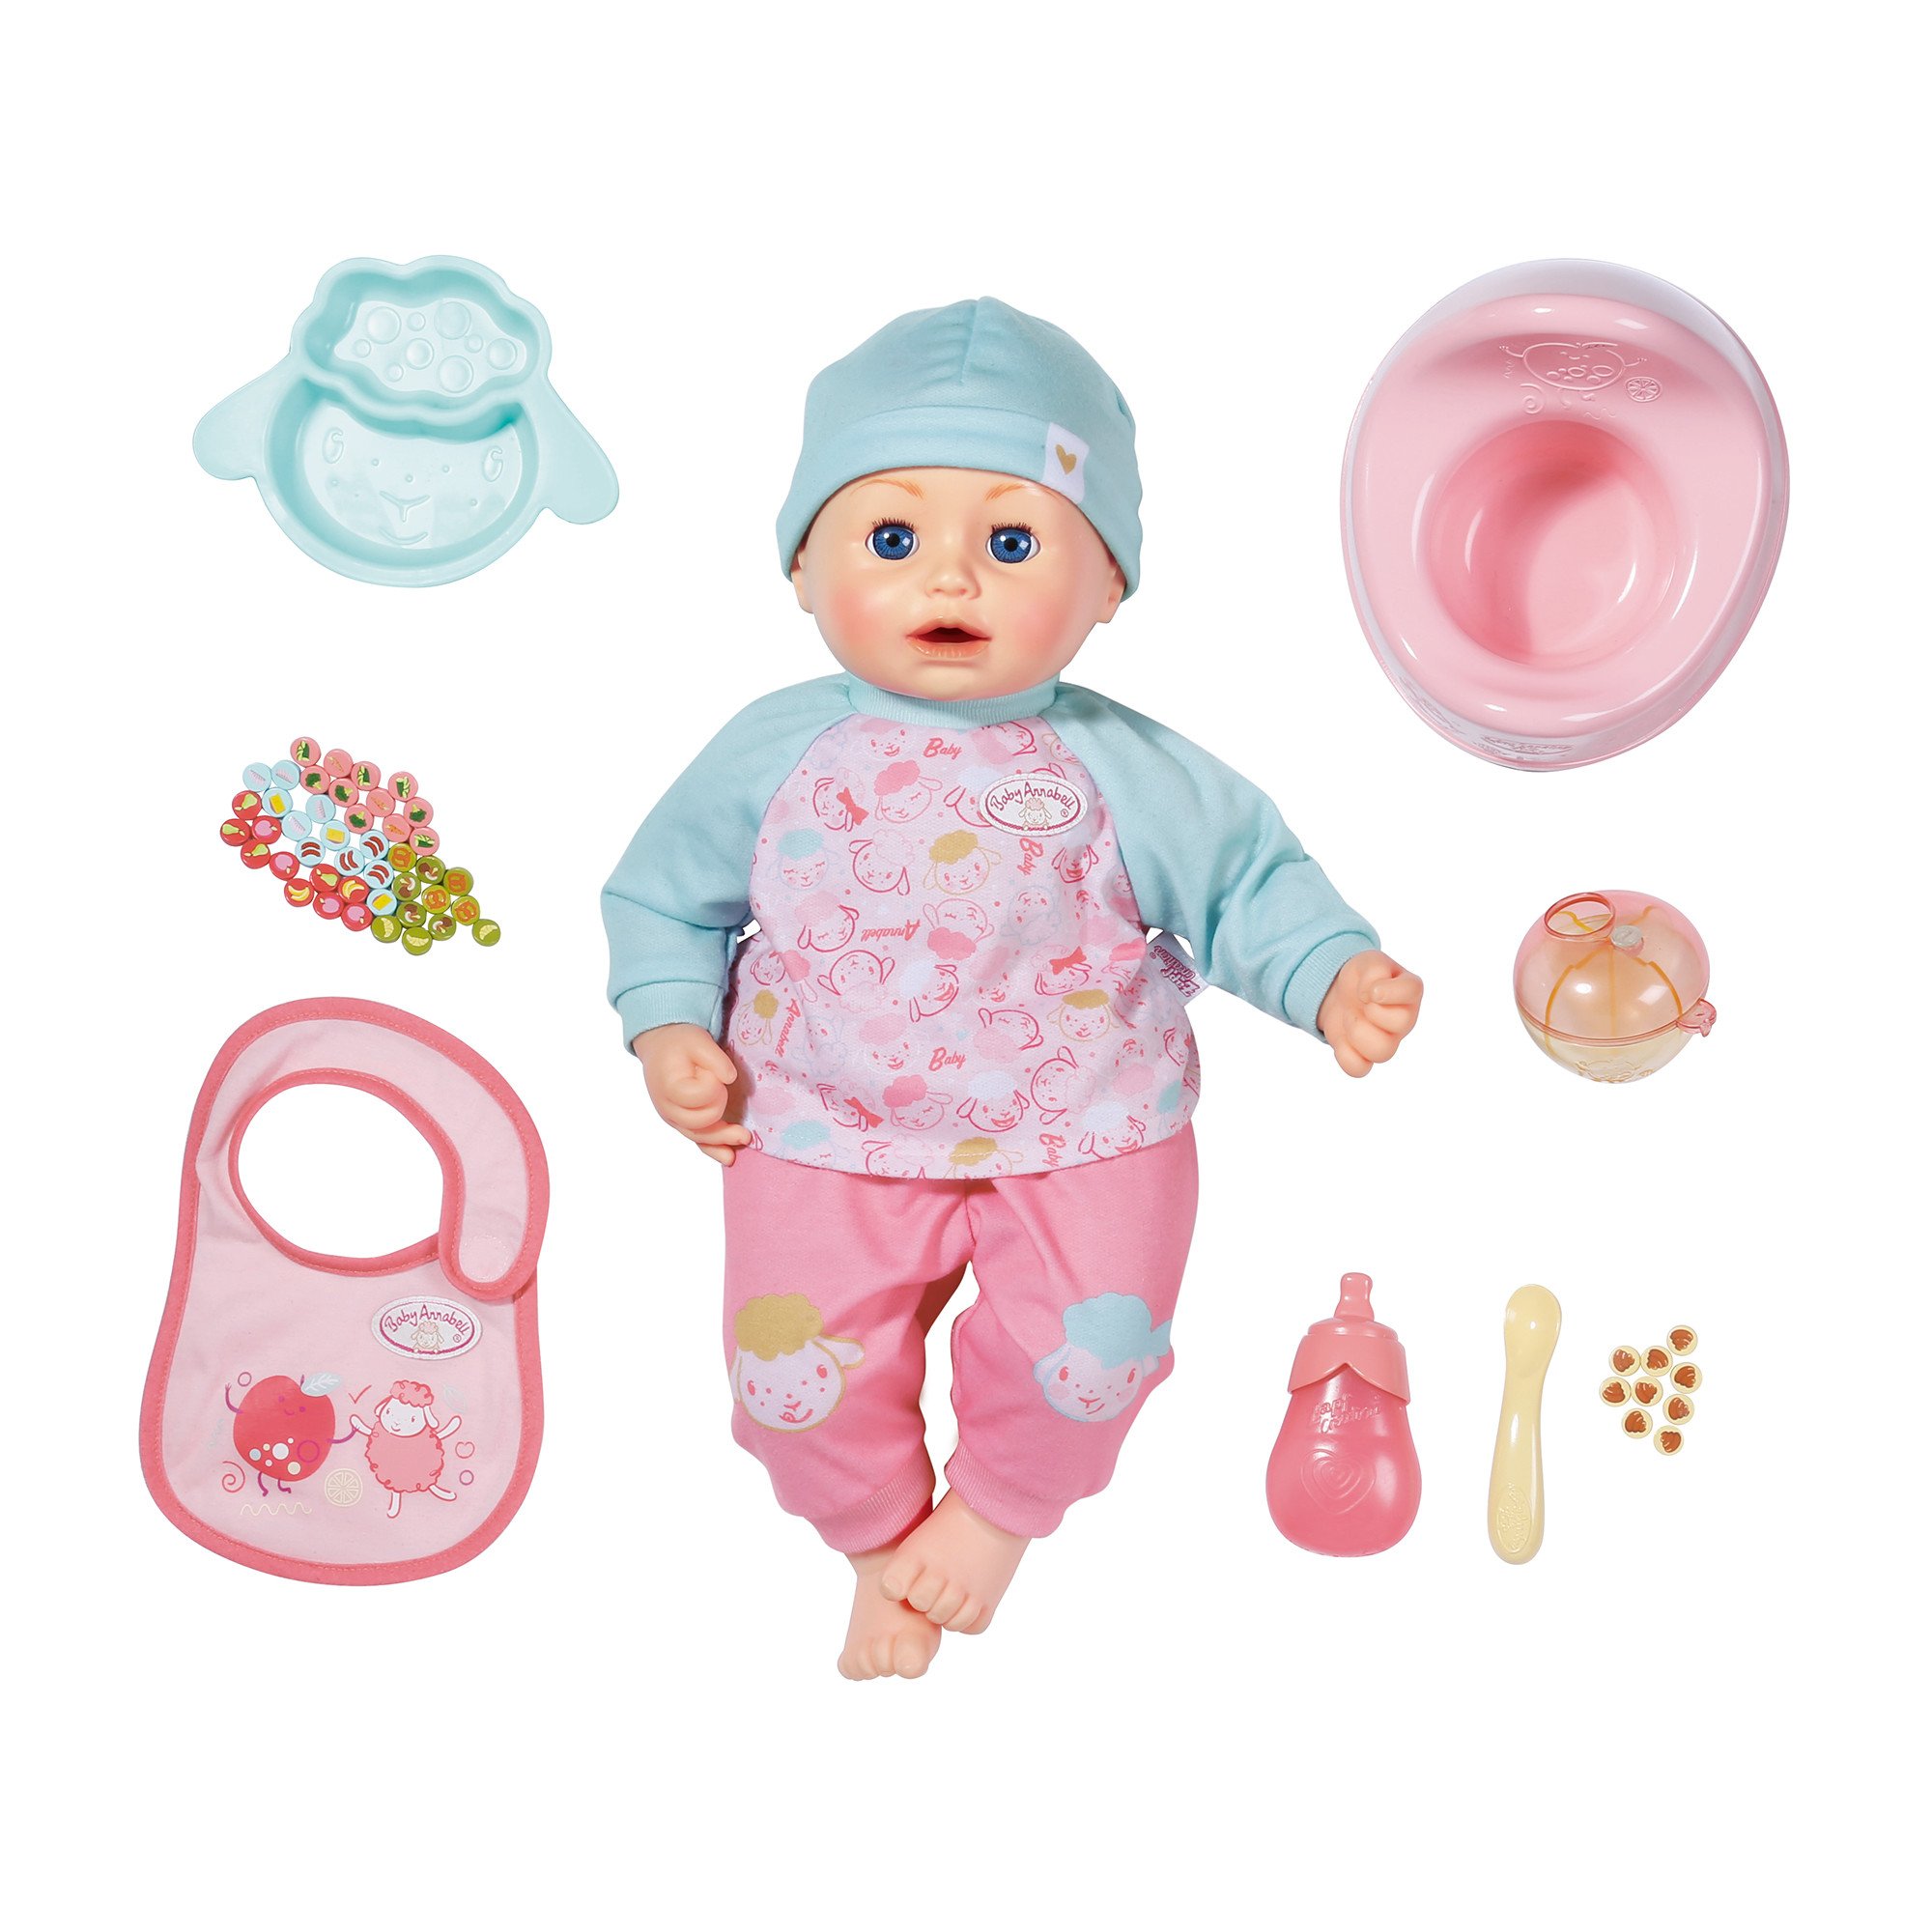 Baby Annabell - Lunch Time Annabell 43cm (702987)